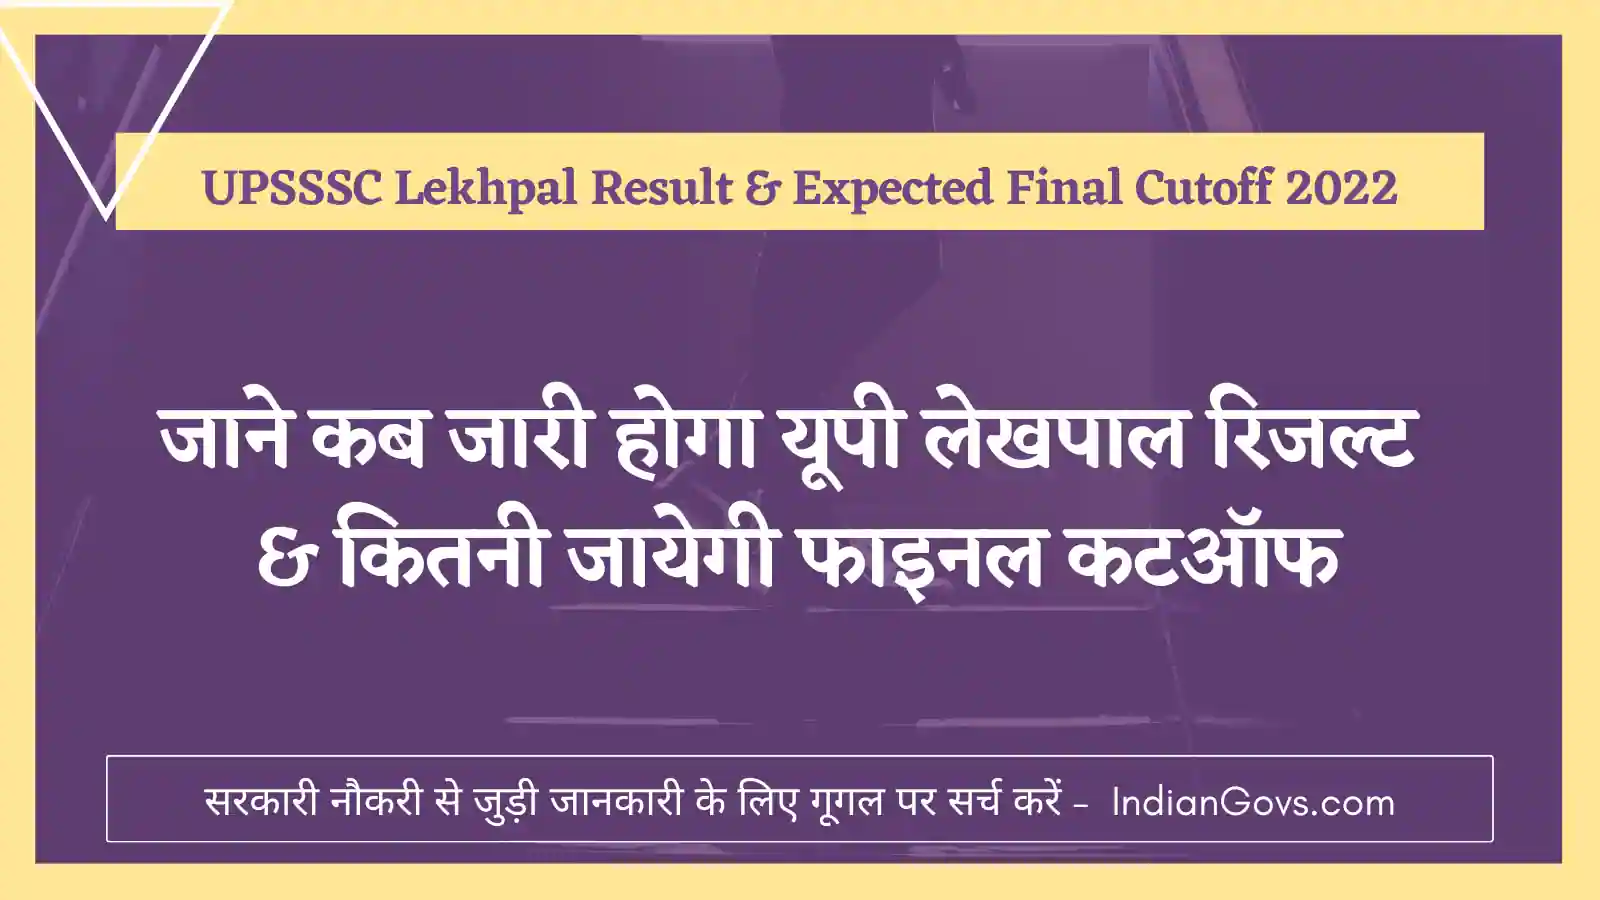 UPSSSC Lekhpal Result & Expected Final Cutoff 2022